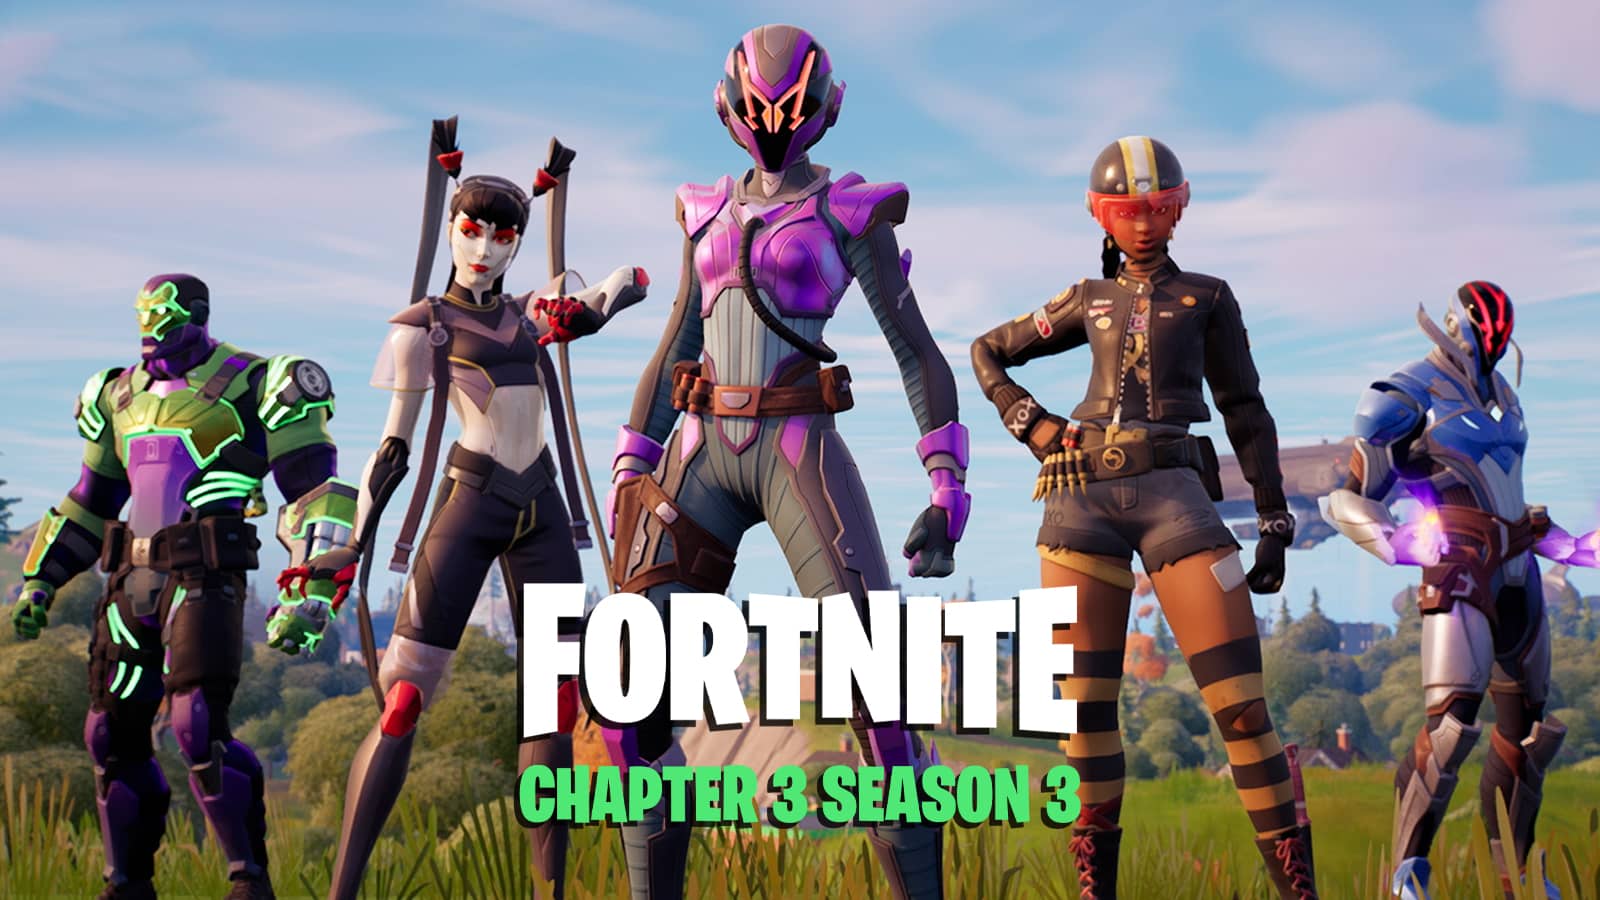 What's New in Fortnite Battle Royale Chapter 3 Season 2: Resistance